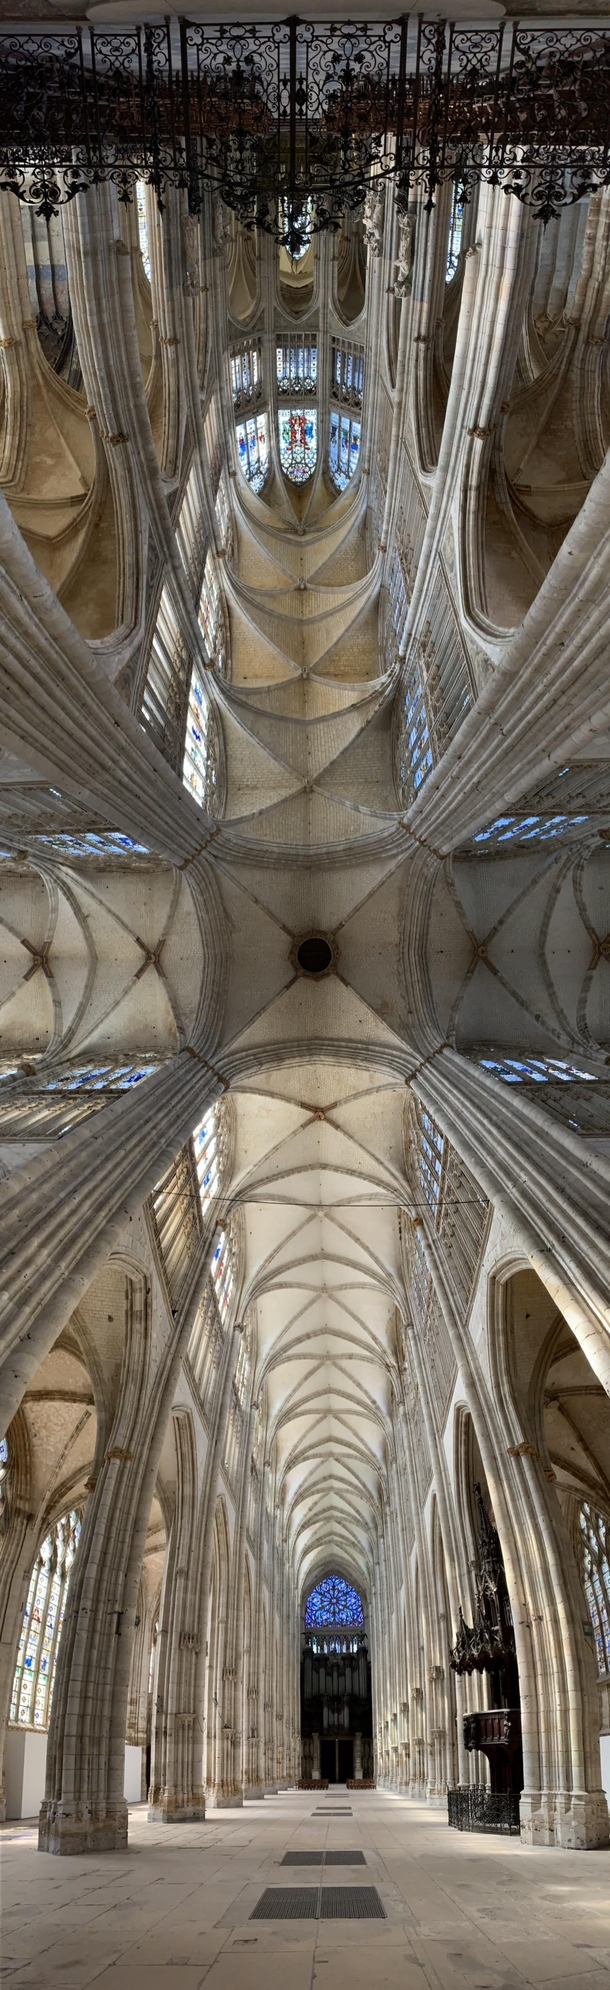 Took this panorama in the Church of St Ouen Rouen France 